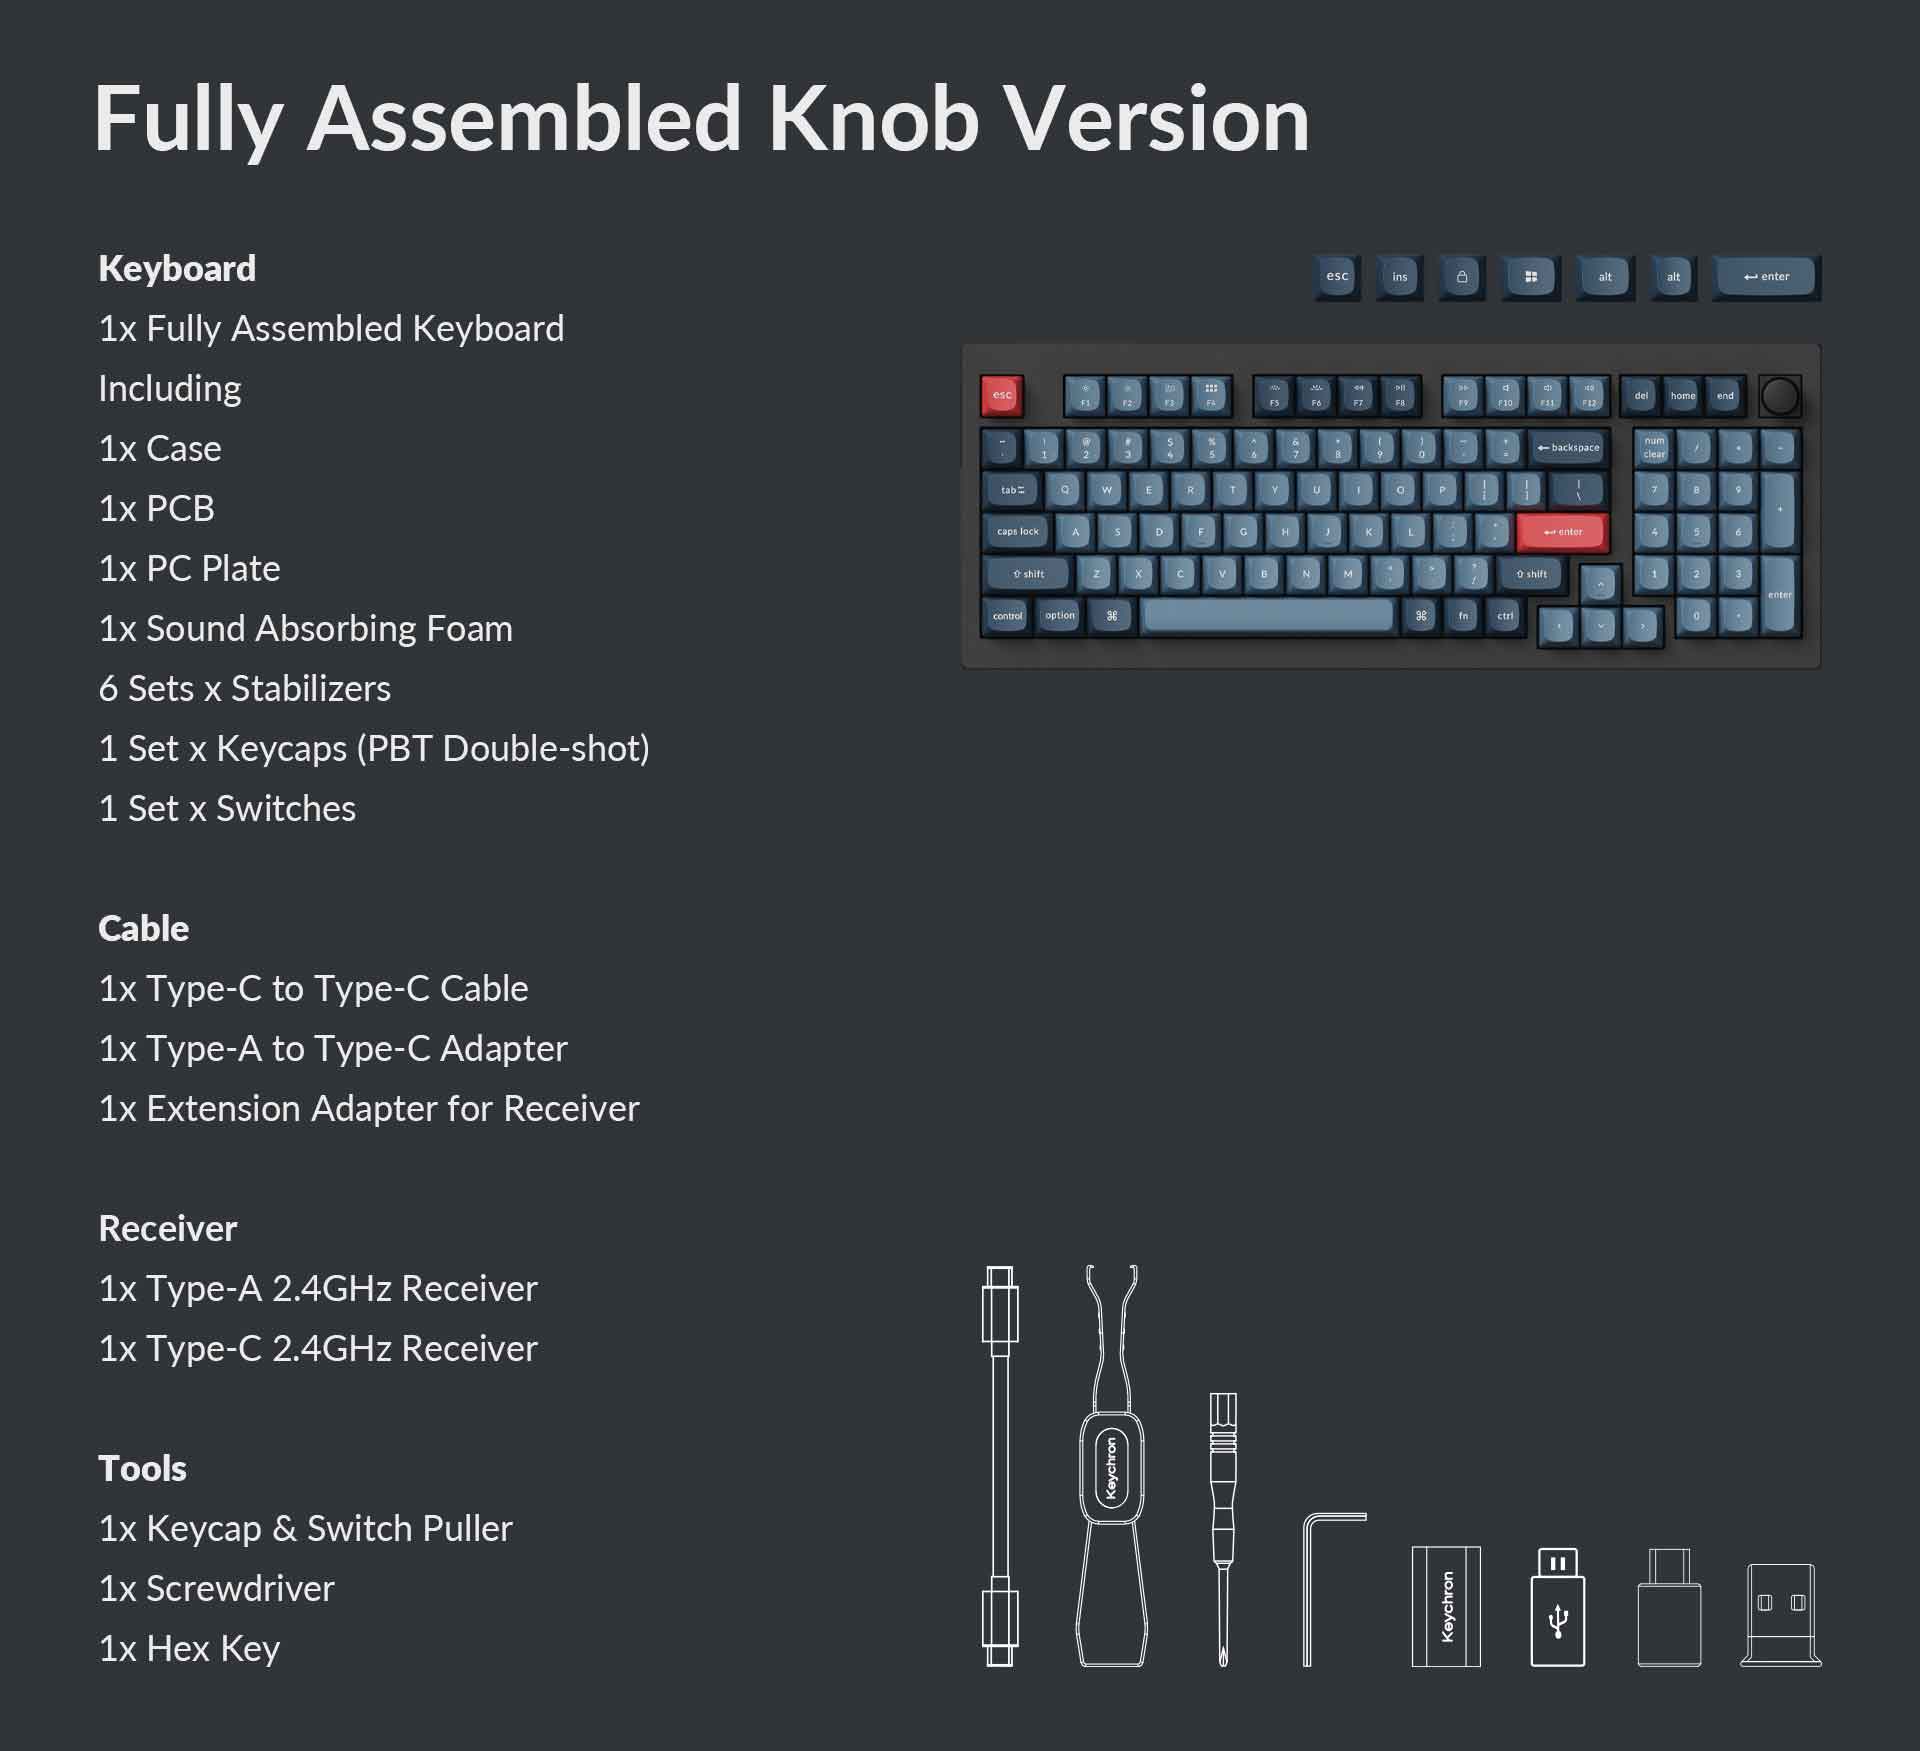 package-list-of-the-Keychron-V5-Max-fully-assembled-knob-version.jpg__PID:9bb22823-5795-4d76-8926-bd75c77d1789